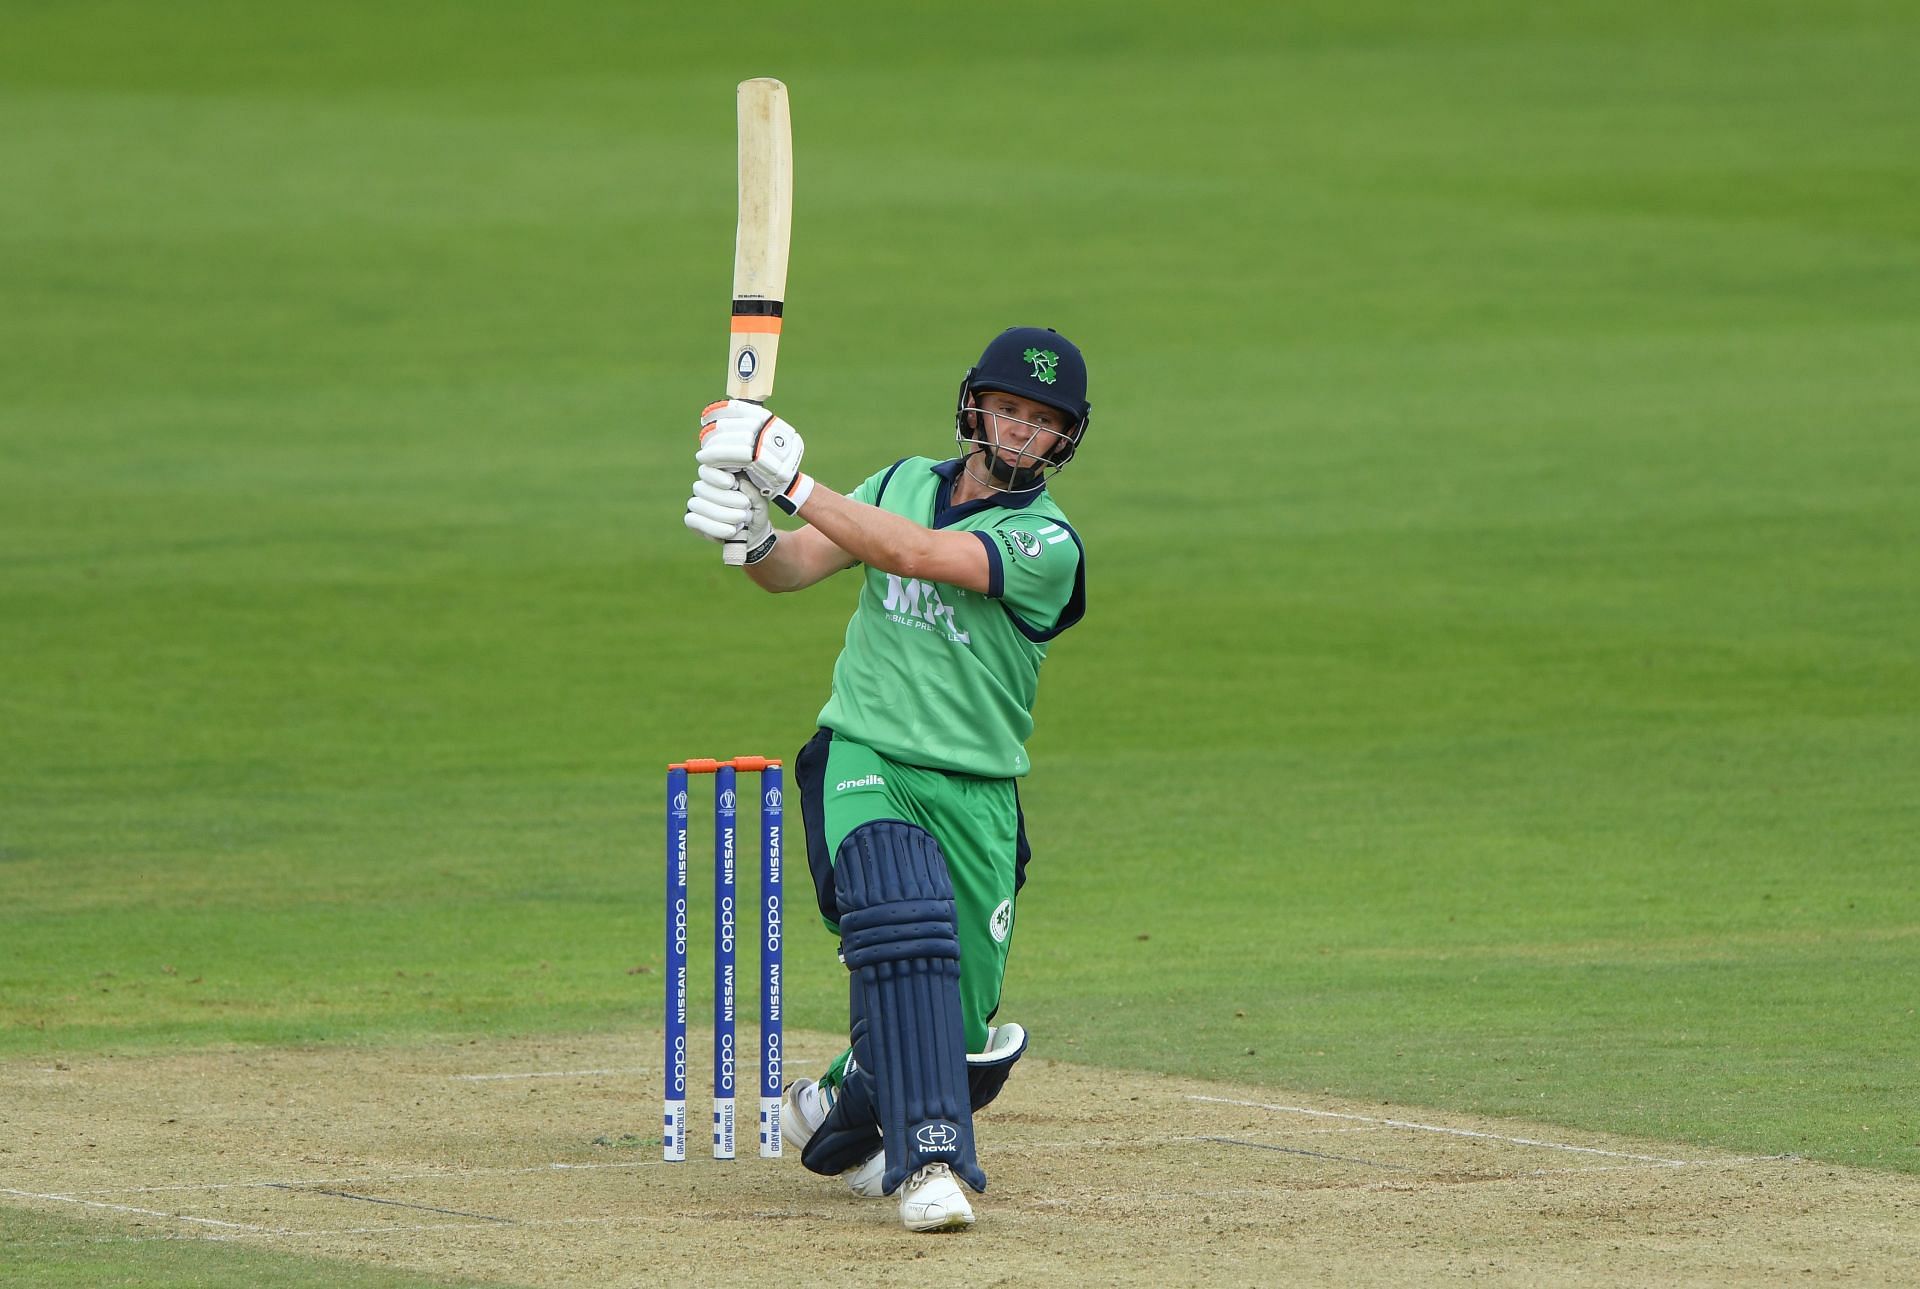 William Porterfield has represented Ireland in 212 matches across formats